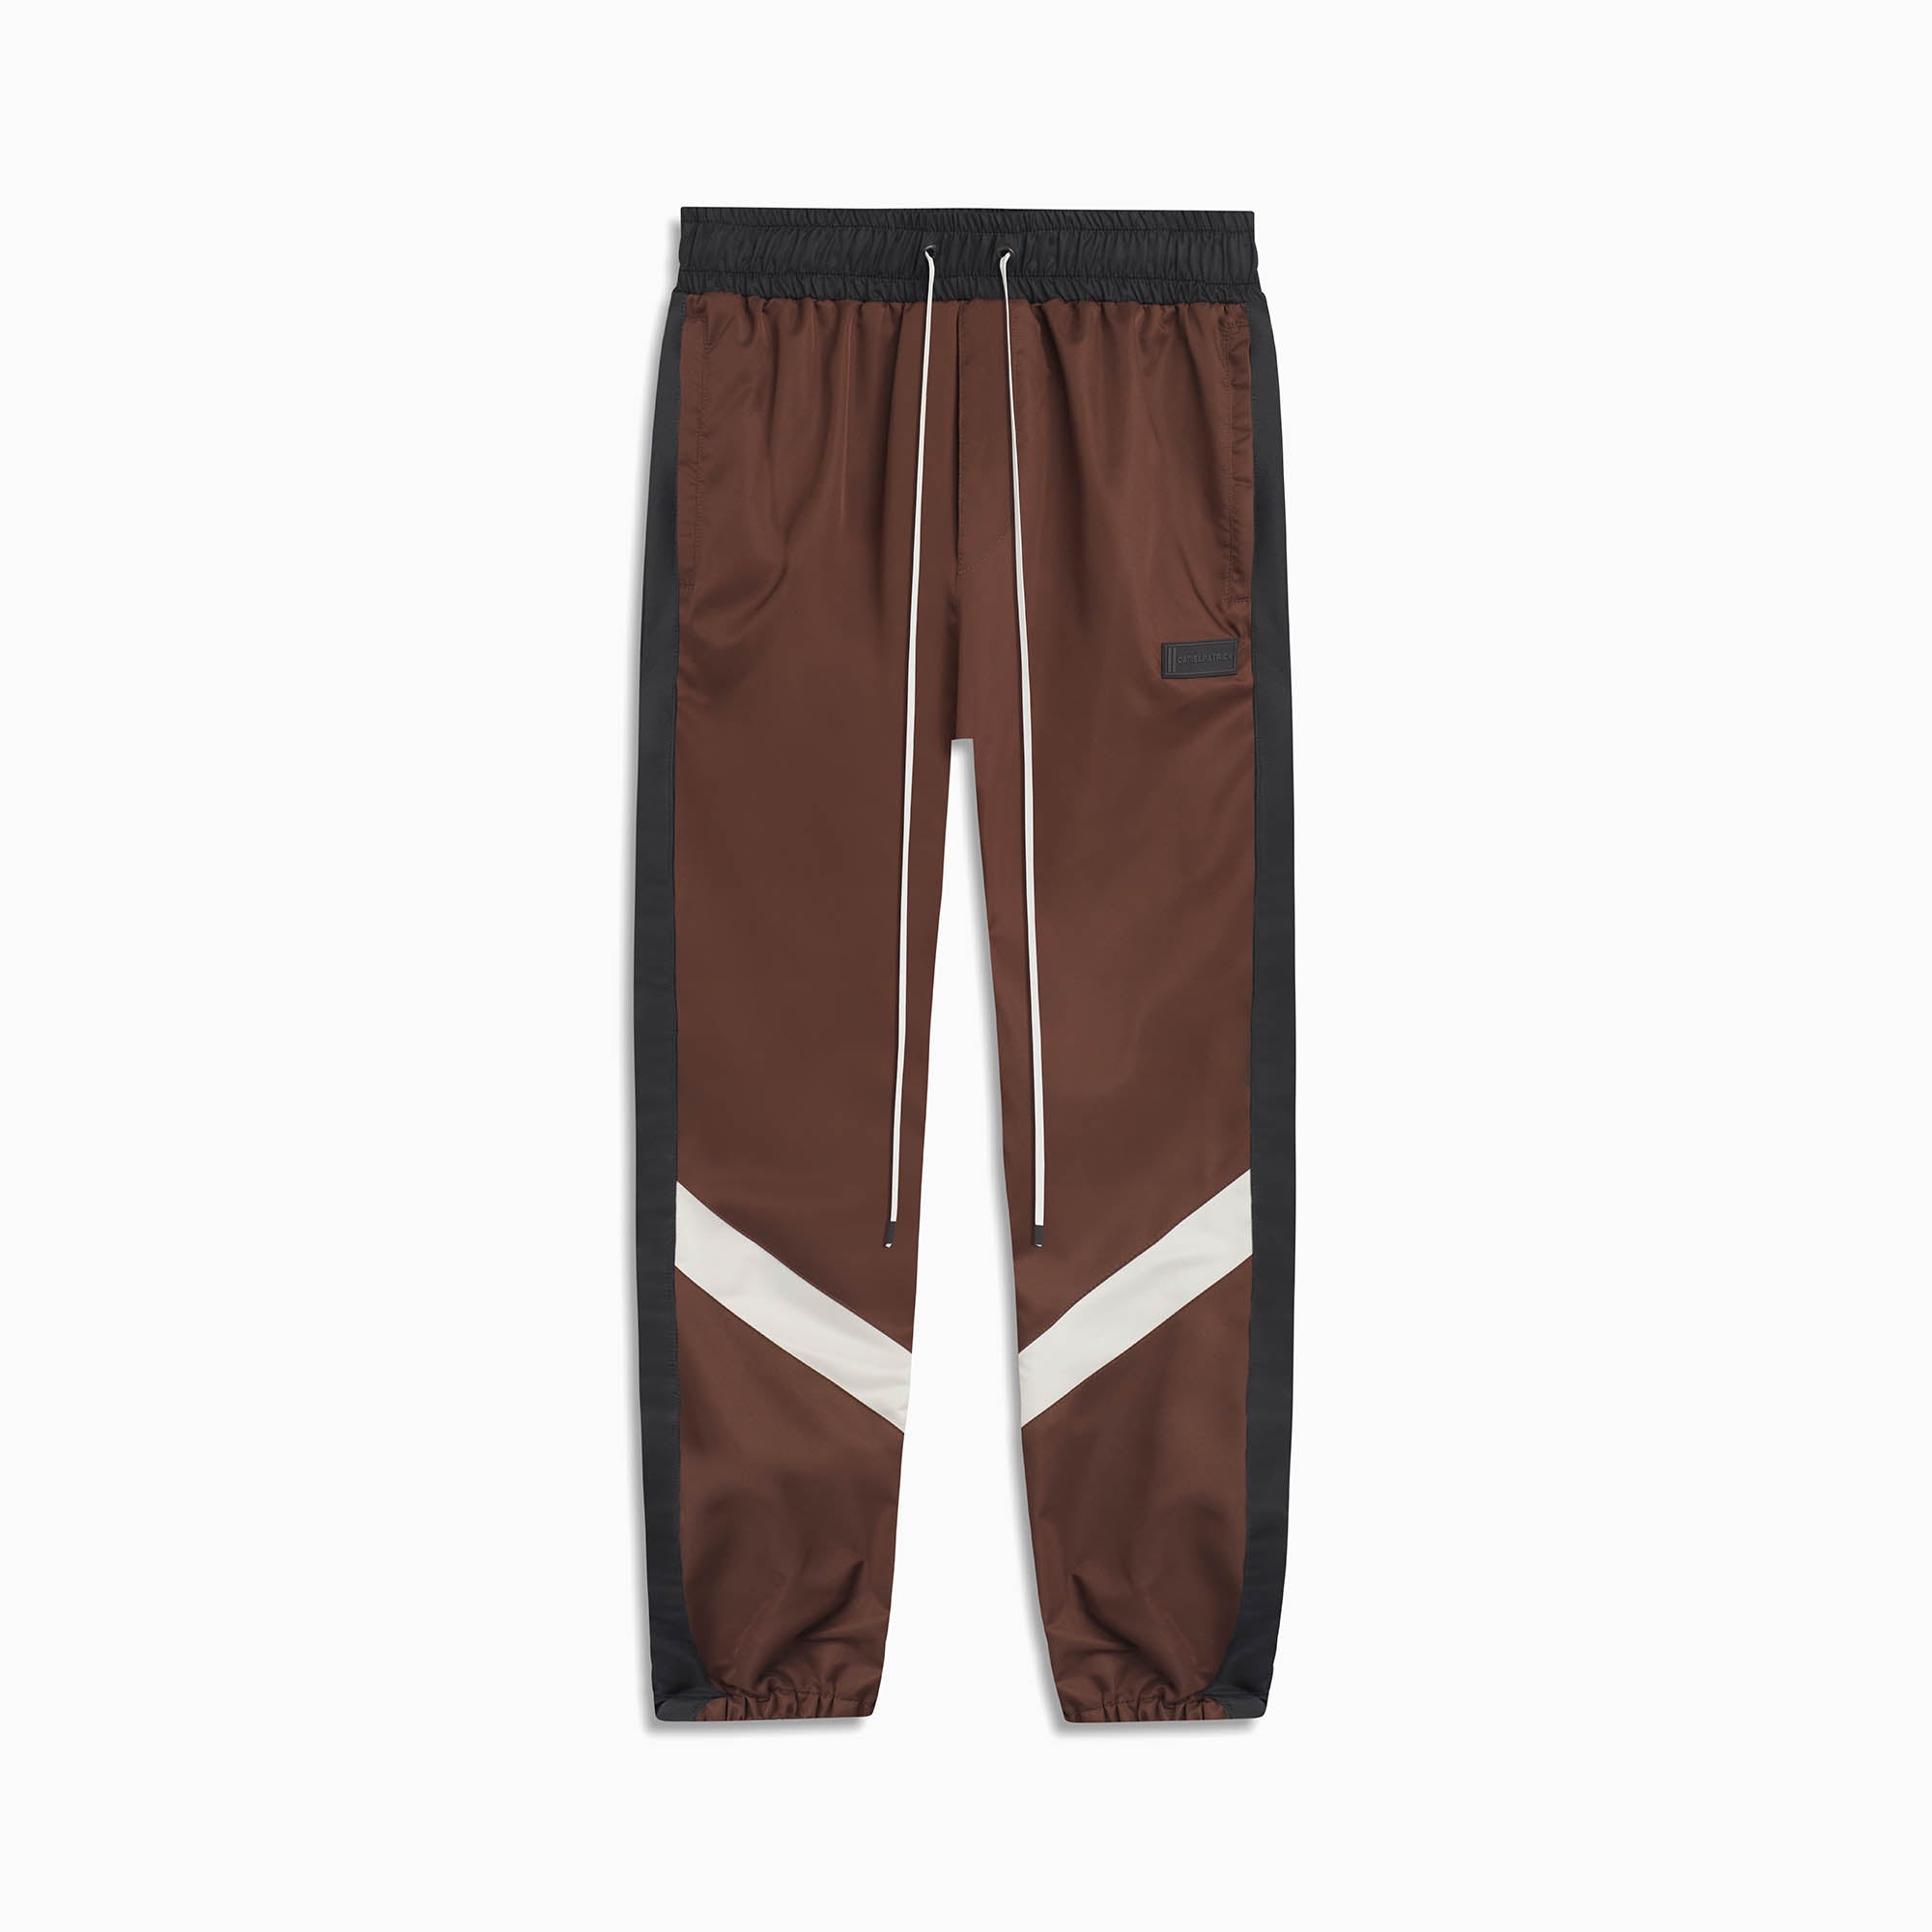 Image of parachute track pant 2.5 / brown + black + ivory